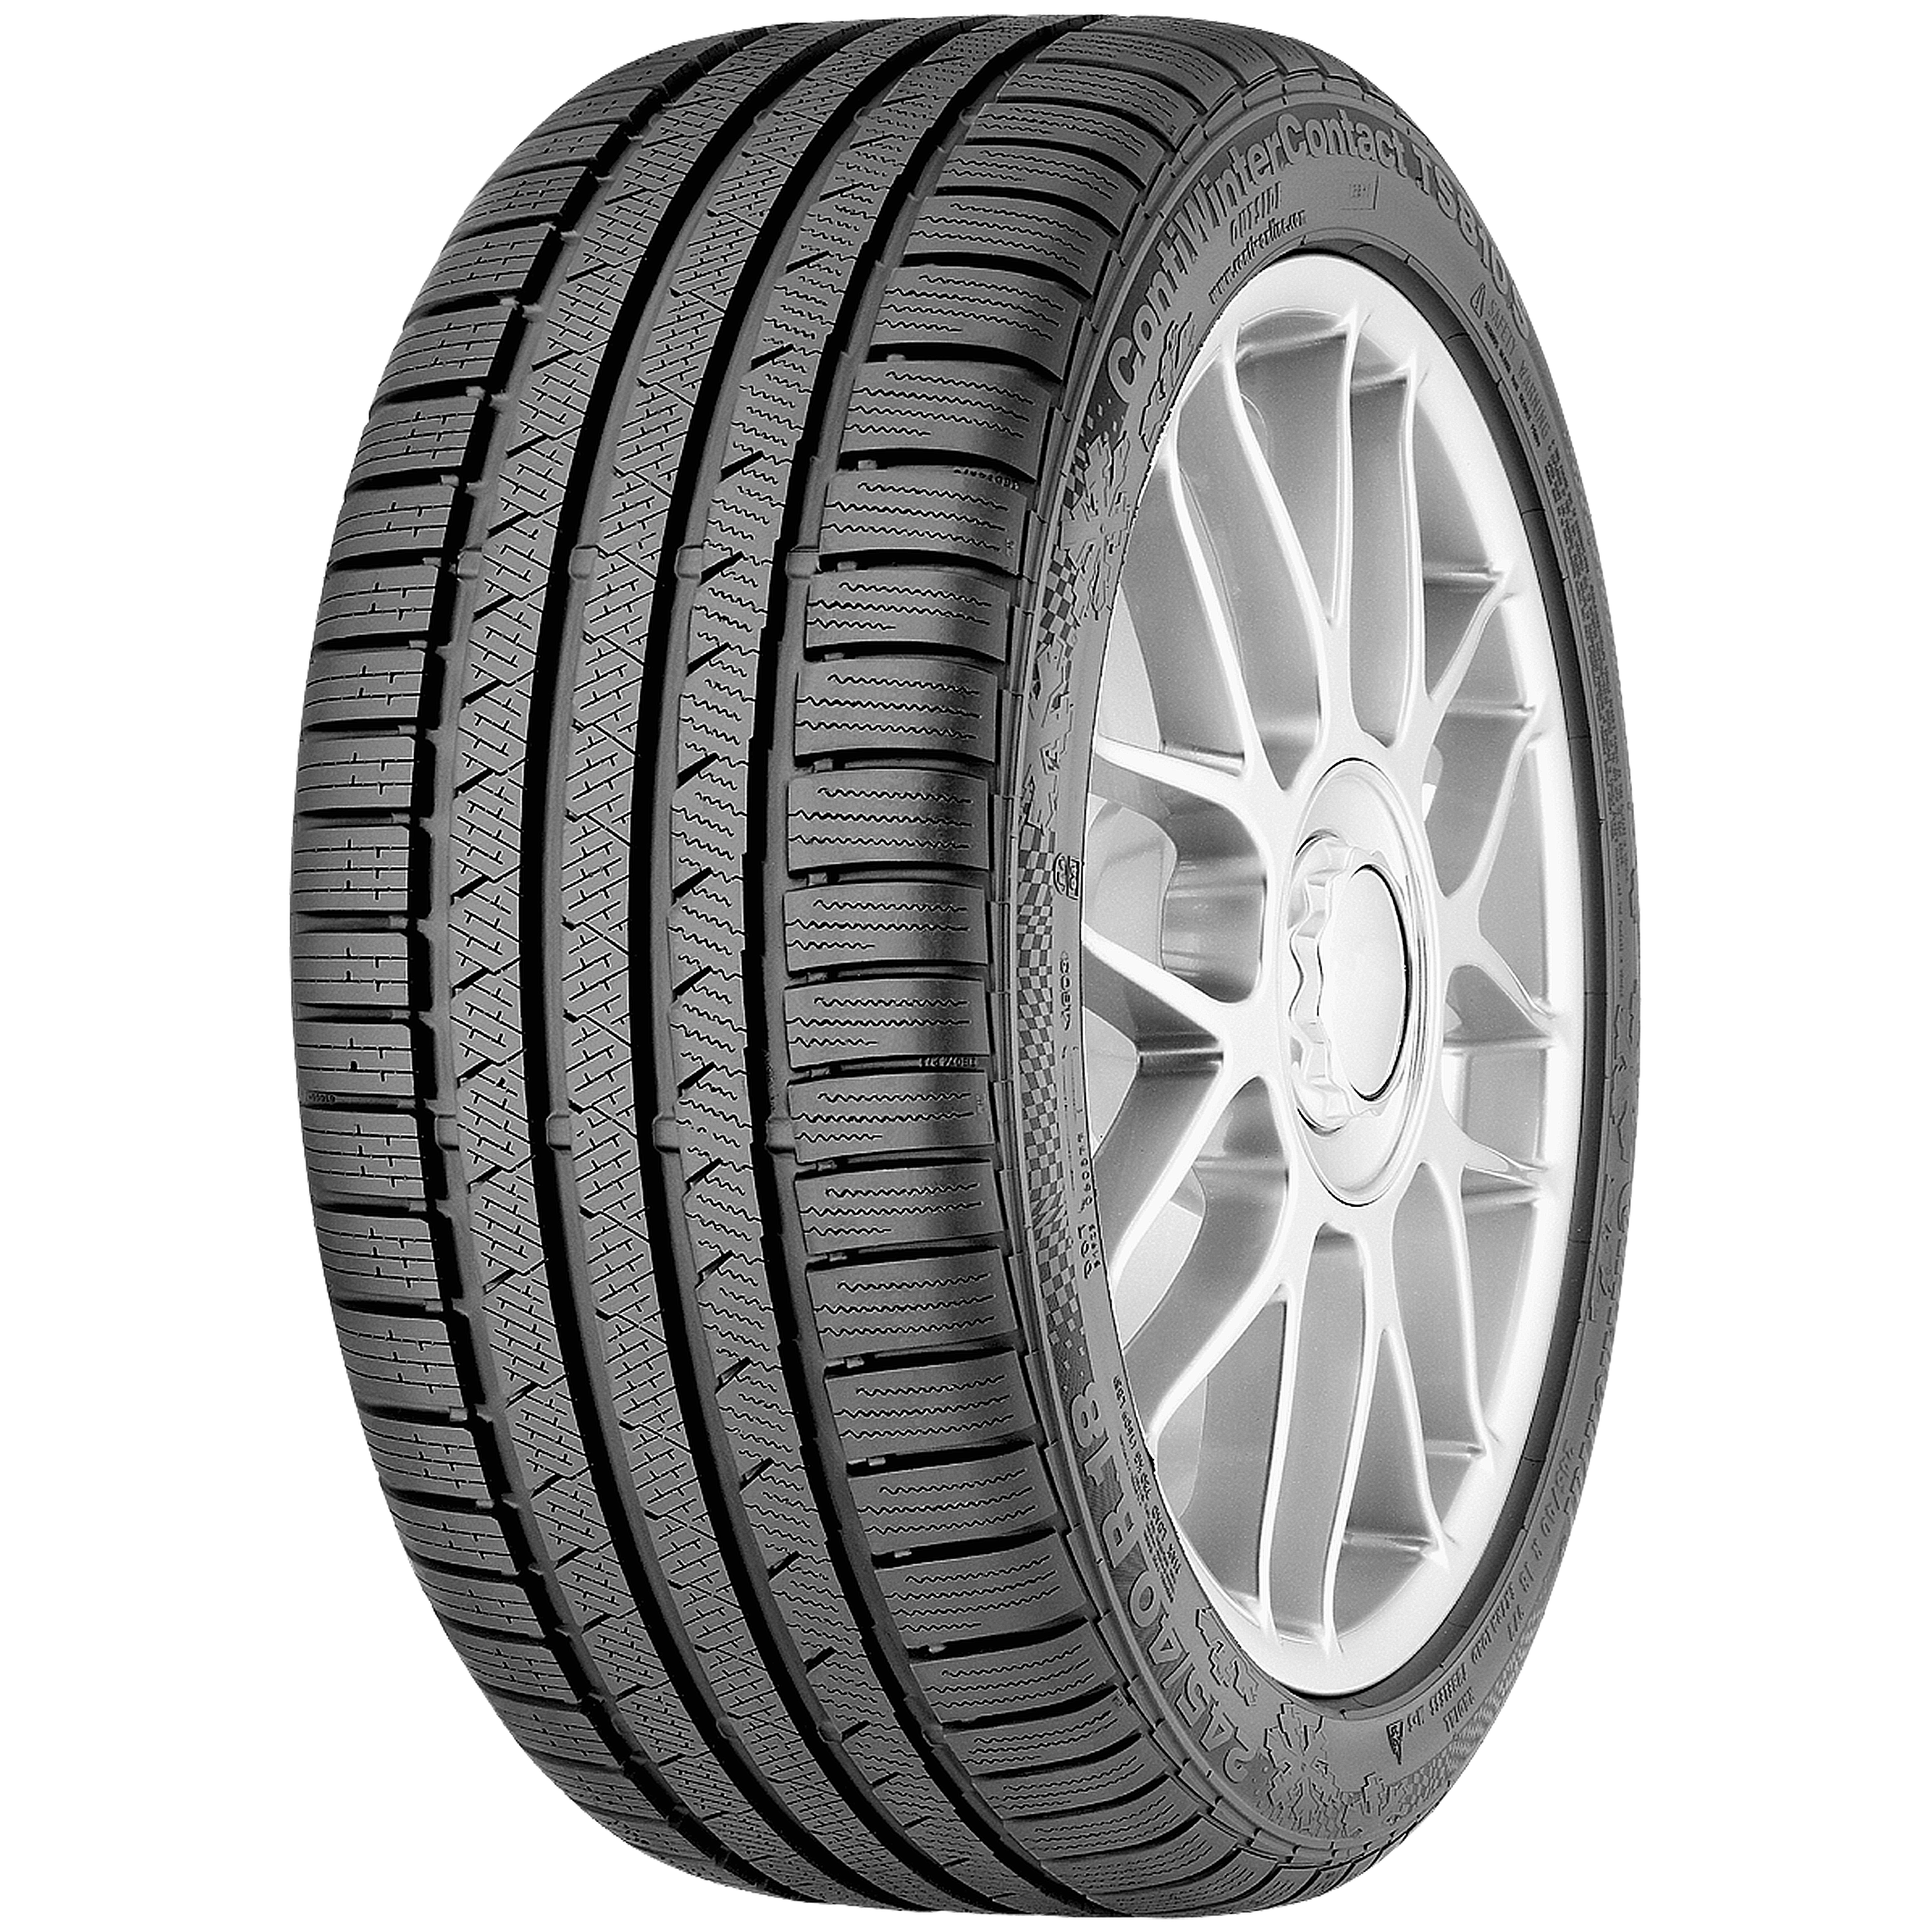 ContiWinterContact TS 810 S: The sporty winter tire for powerful medium and  luxury-class cars